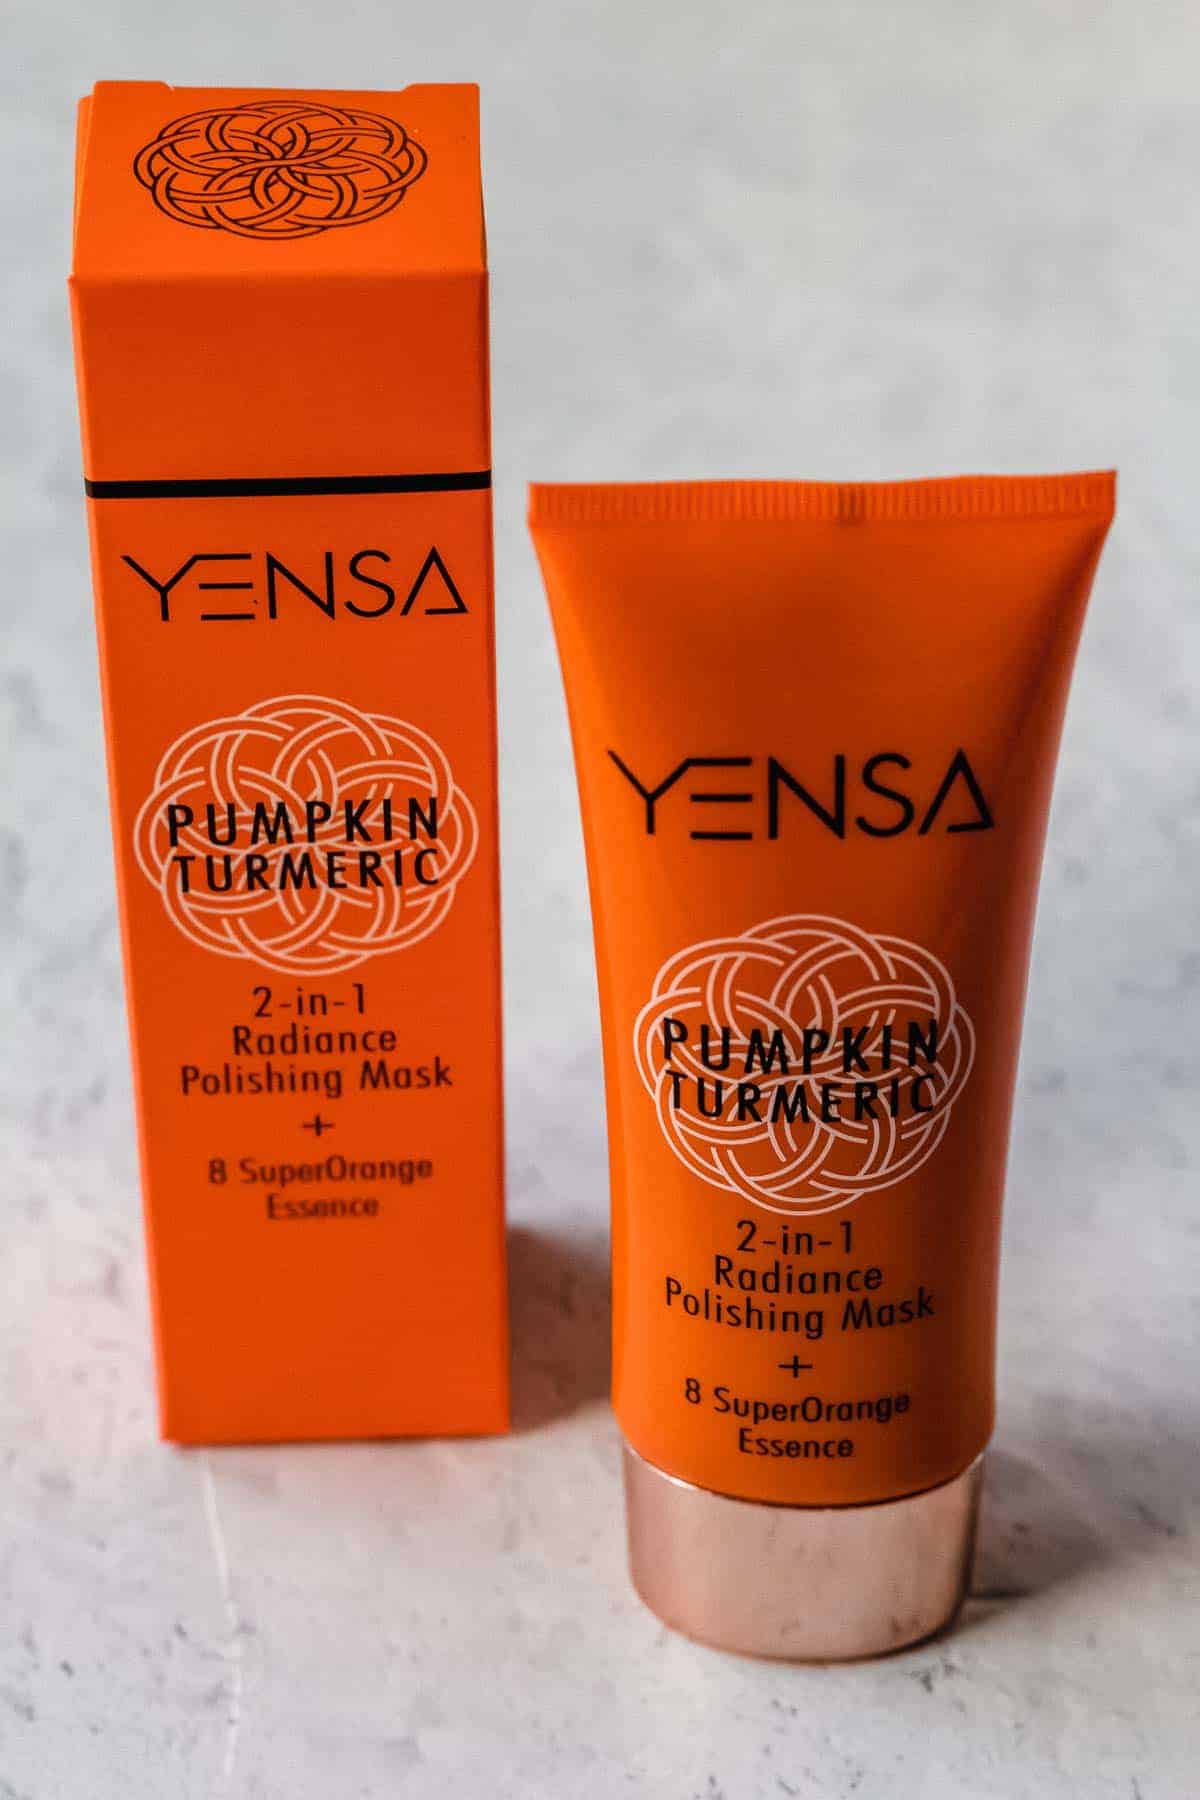 Yensa Pumpkin Turmeric 2-in-1 Radiance Polishing Mask and it's packaging on a white background